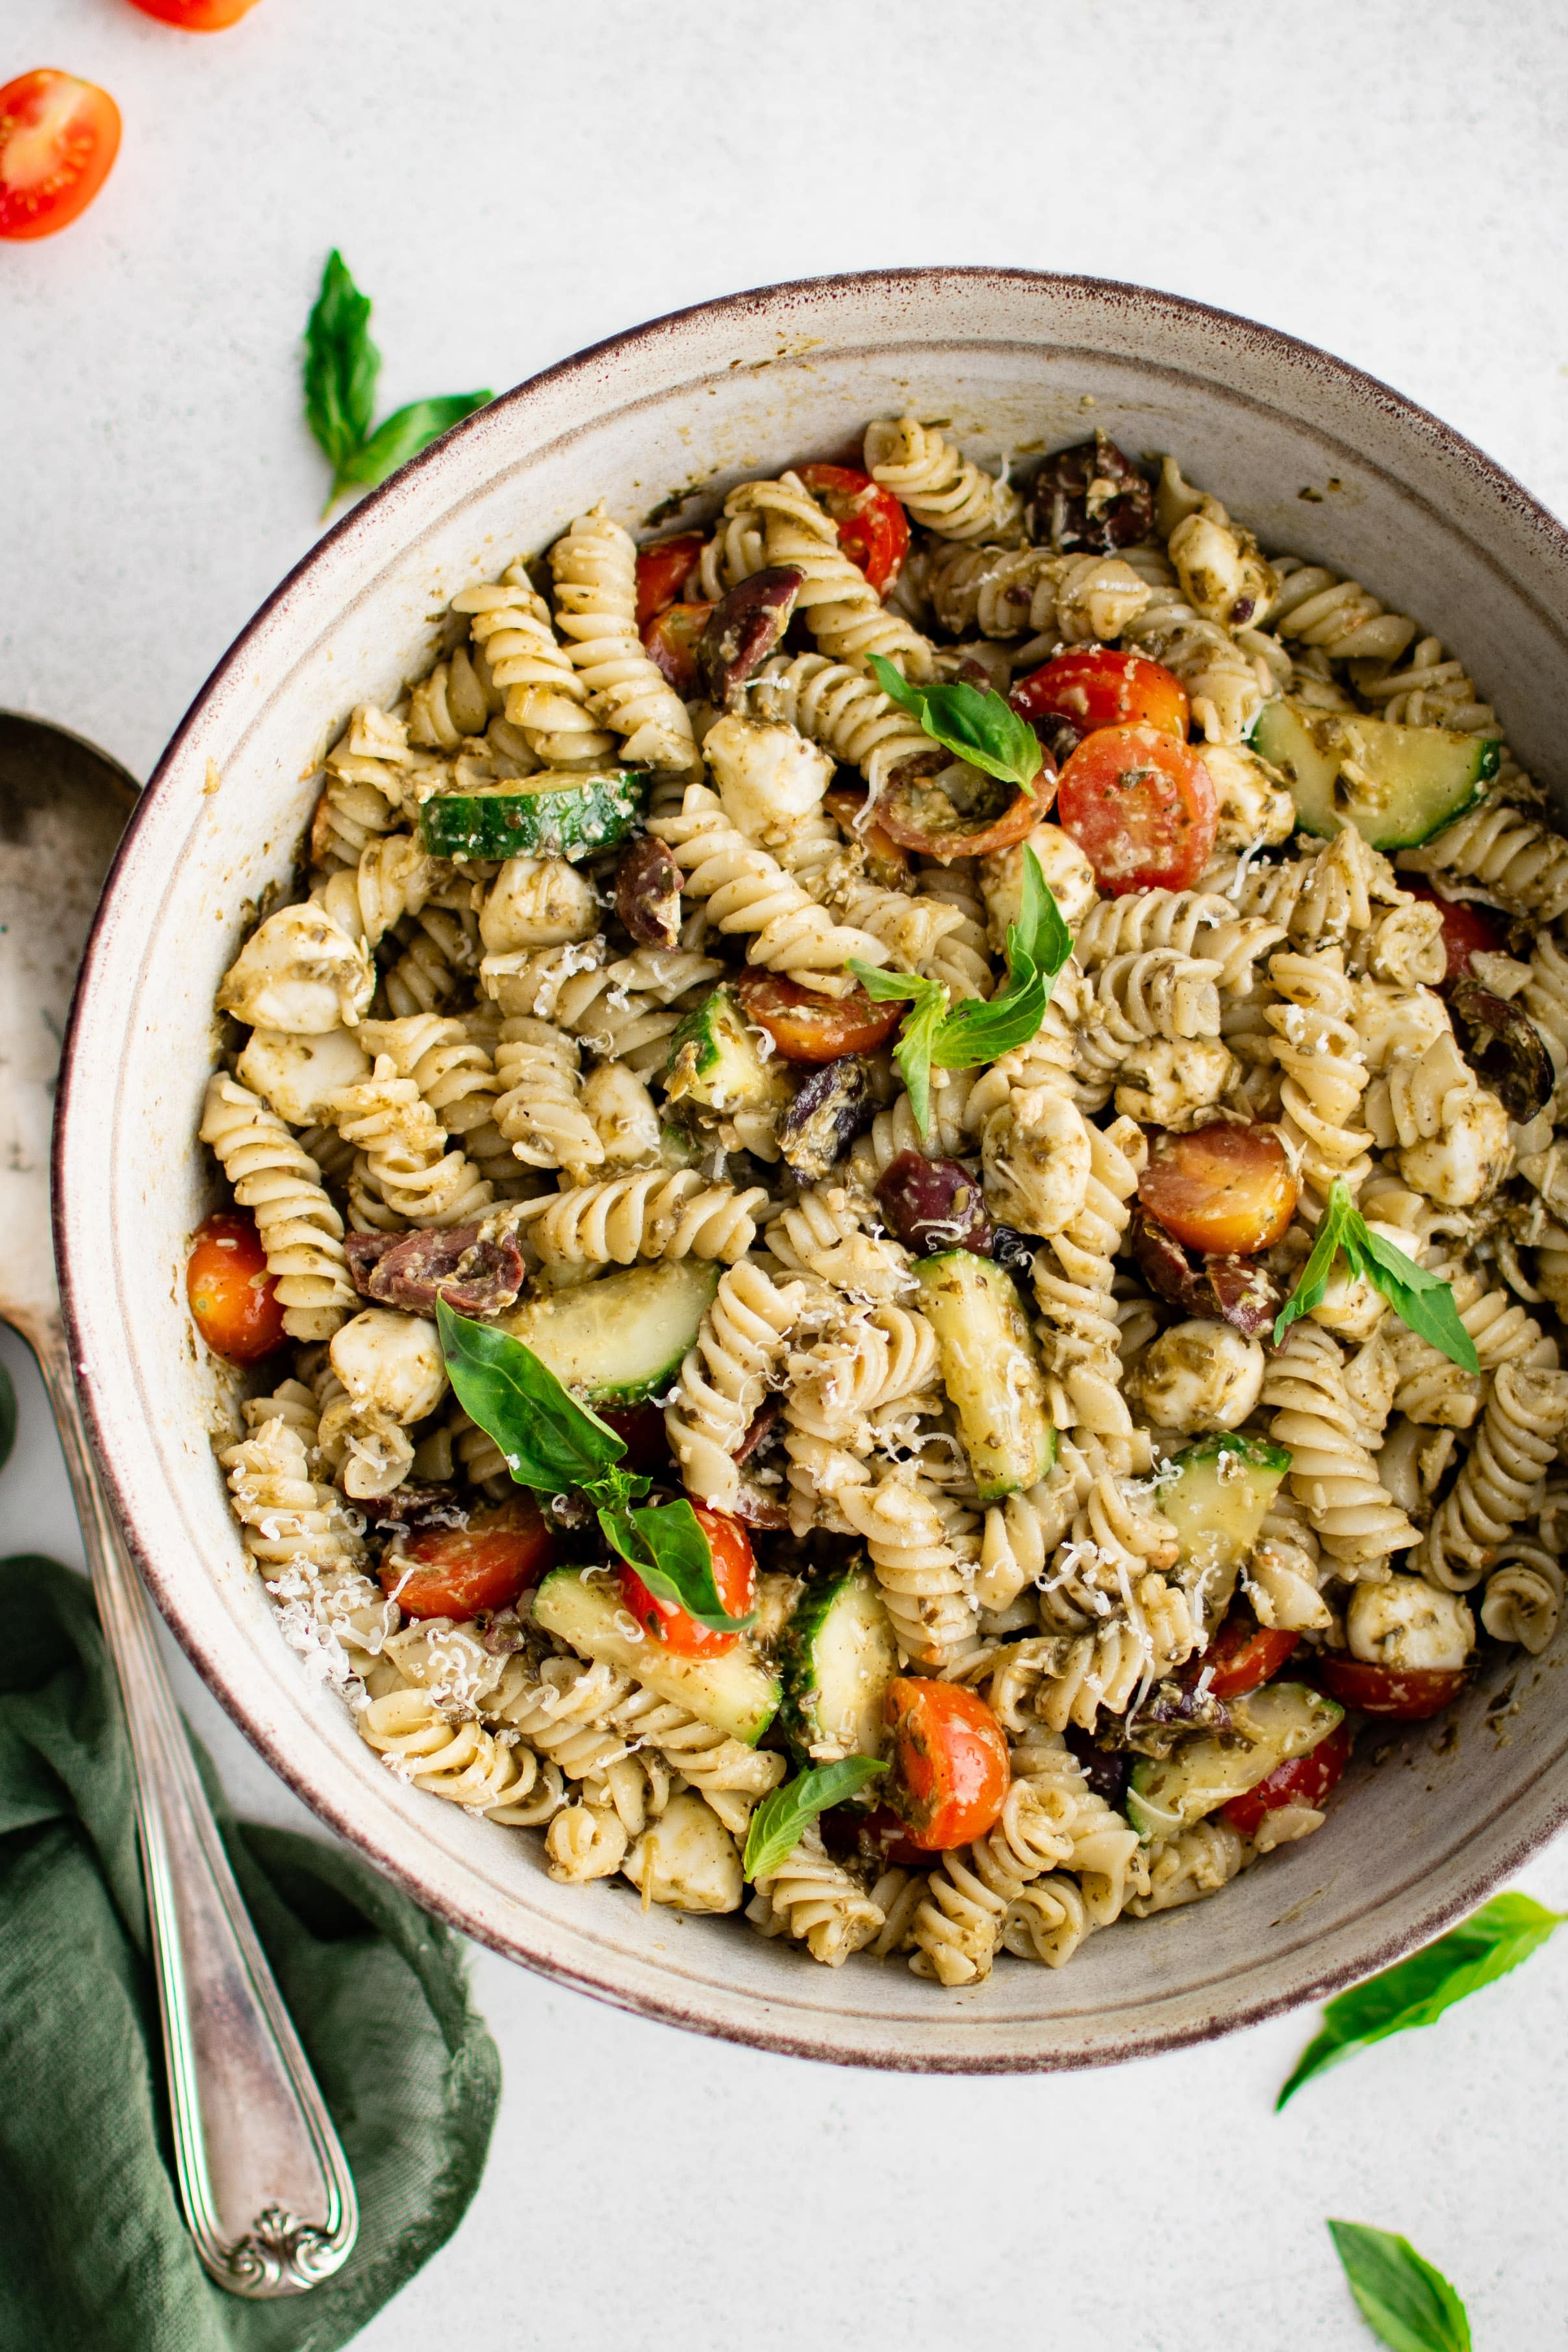 Large serving bowl filled with cold pesto pasta salad made with rotini pasta, tomatoes, cucumber, mozzarella pearls, and kalamata olives.